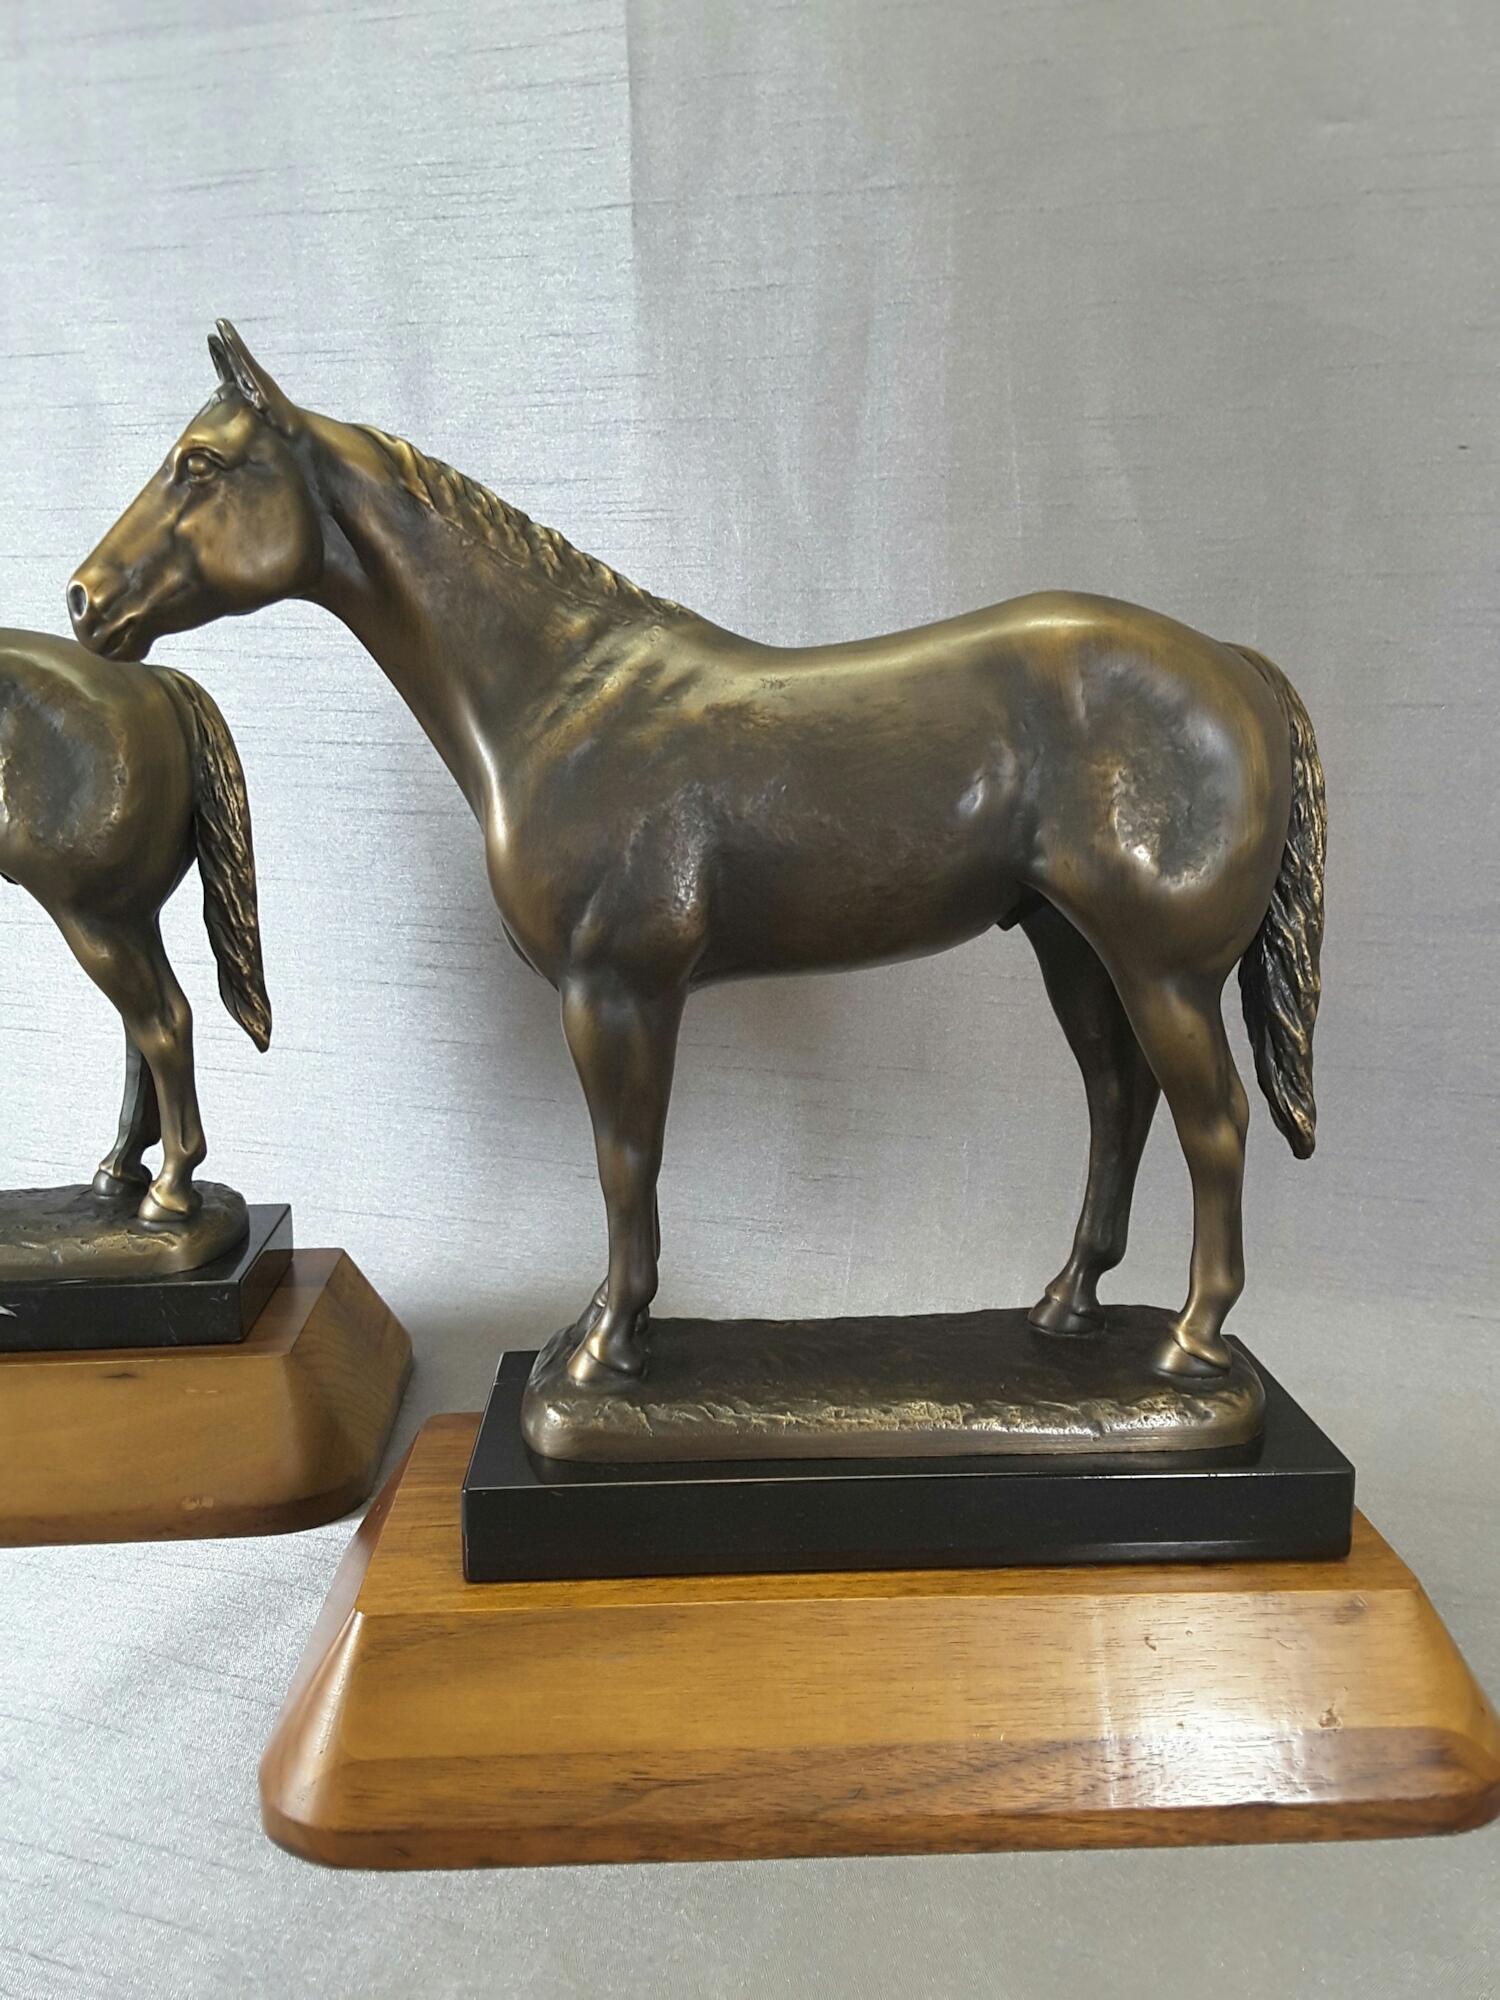 Pair of signed and dated solid bronze American quarter horses on marble and walnut bases, for the American quarter horse association, by Suzanne Fielder, dated 1984. The horses measure 12.00